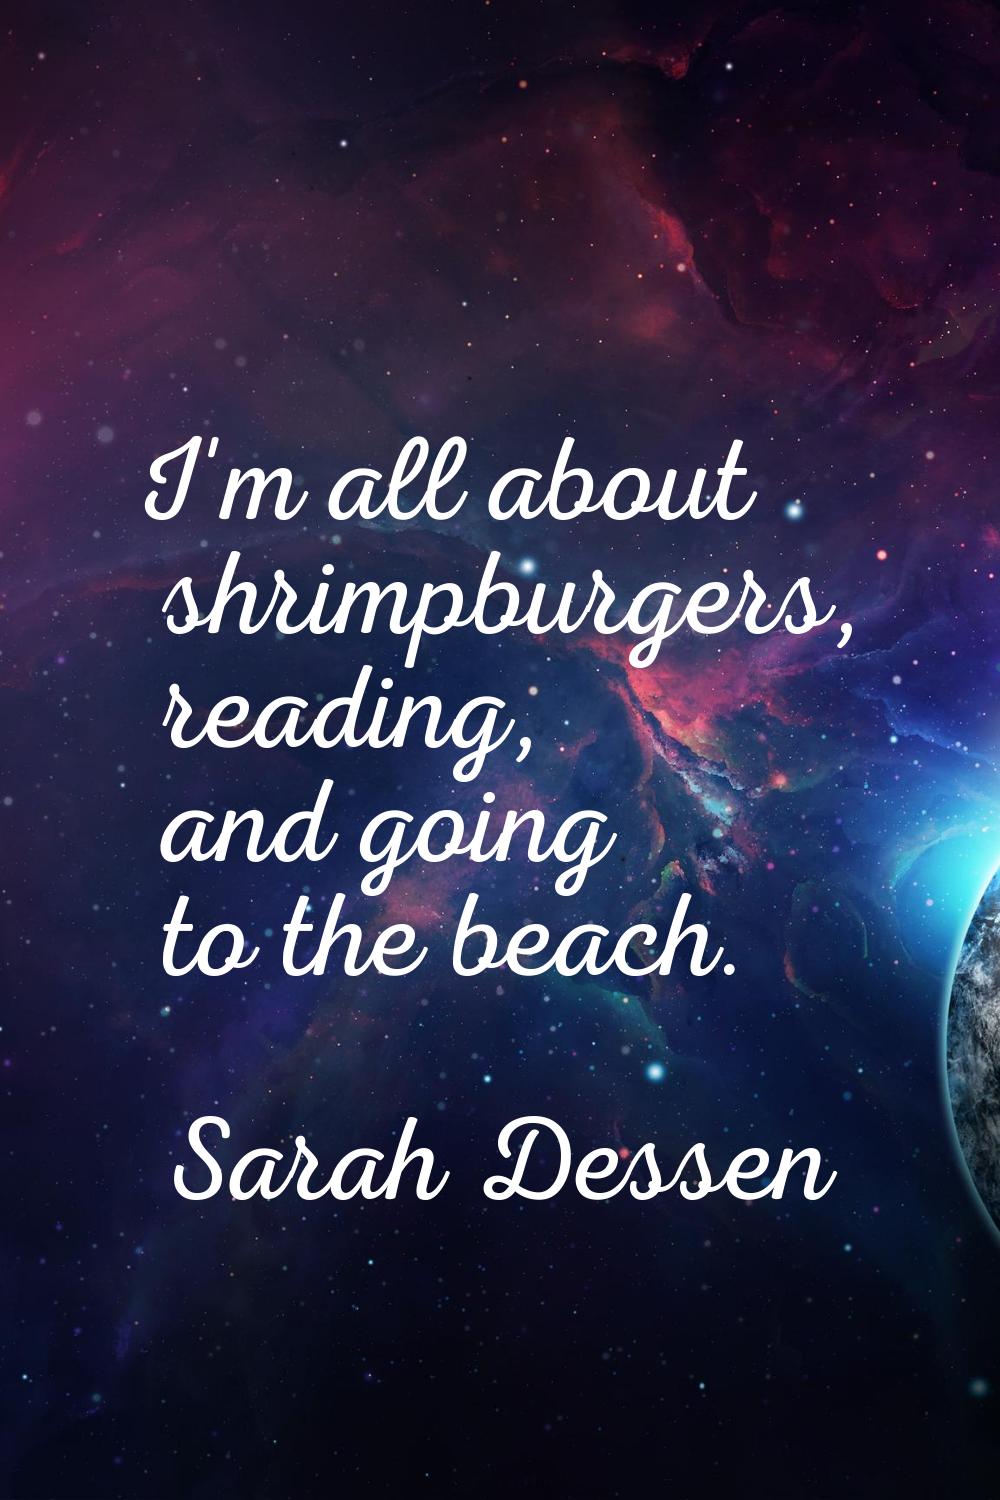 I'm all about shrimpburgers, reading, and going to the beach.